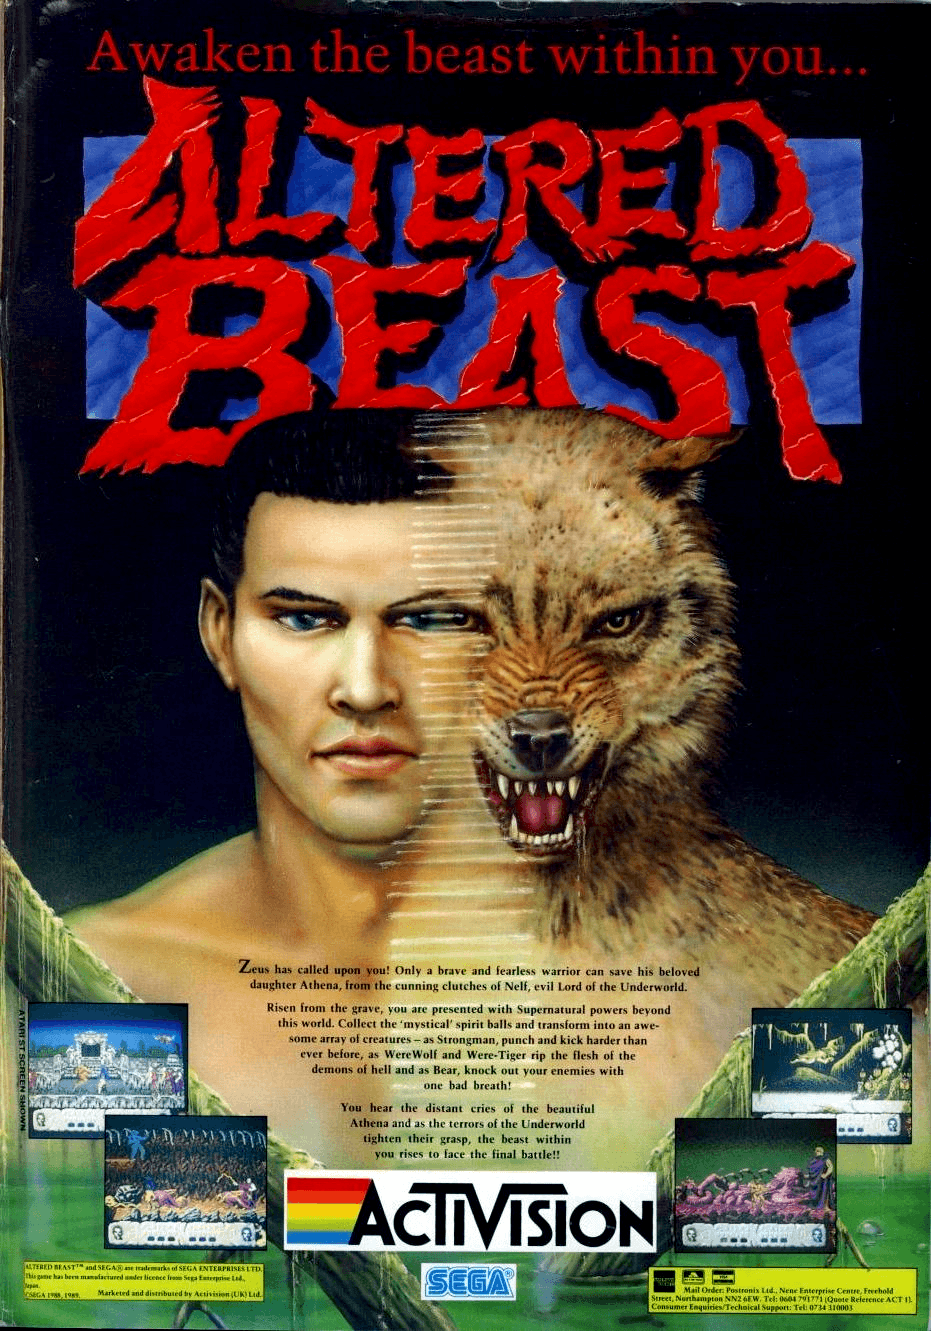 Image For Post | The game is set in Ancient Greece, and follows a centurion who is resurrected by Zeus to rescue his daughter Athena. In order to save his daughter, Zeus transforms the centurion into beasts with the use of power-ups. 

The game can be played in single player mode, or in same-screen multiplayer co-op mode.